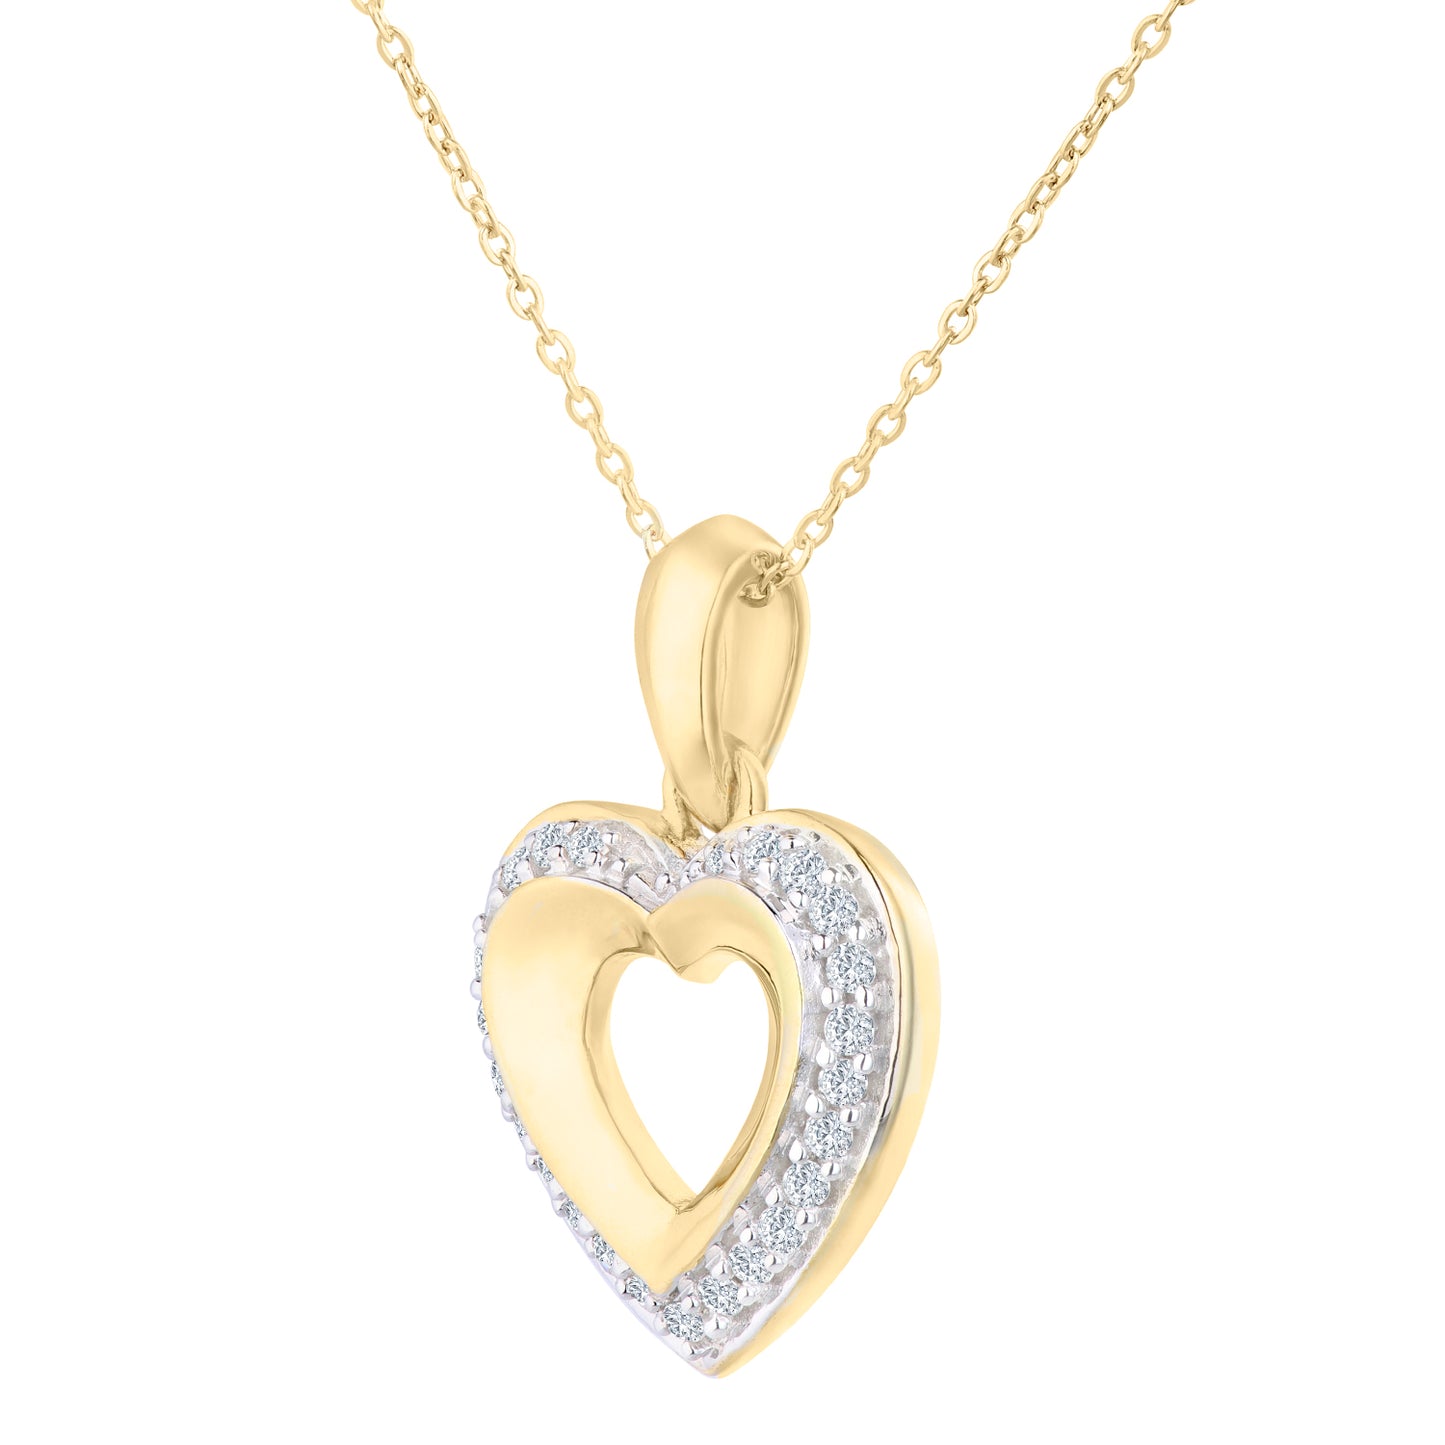 9ct Gold  Round 15pts Diamond Heart Pendant Necklace 18 inch - PP0AXL1810Y